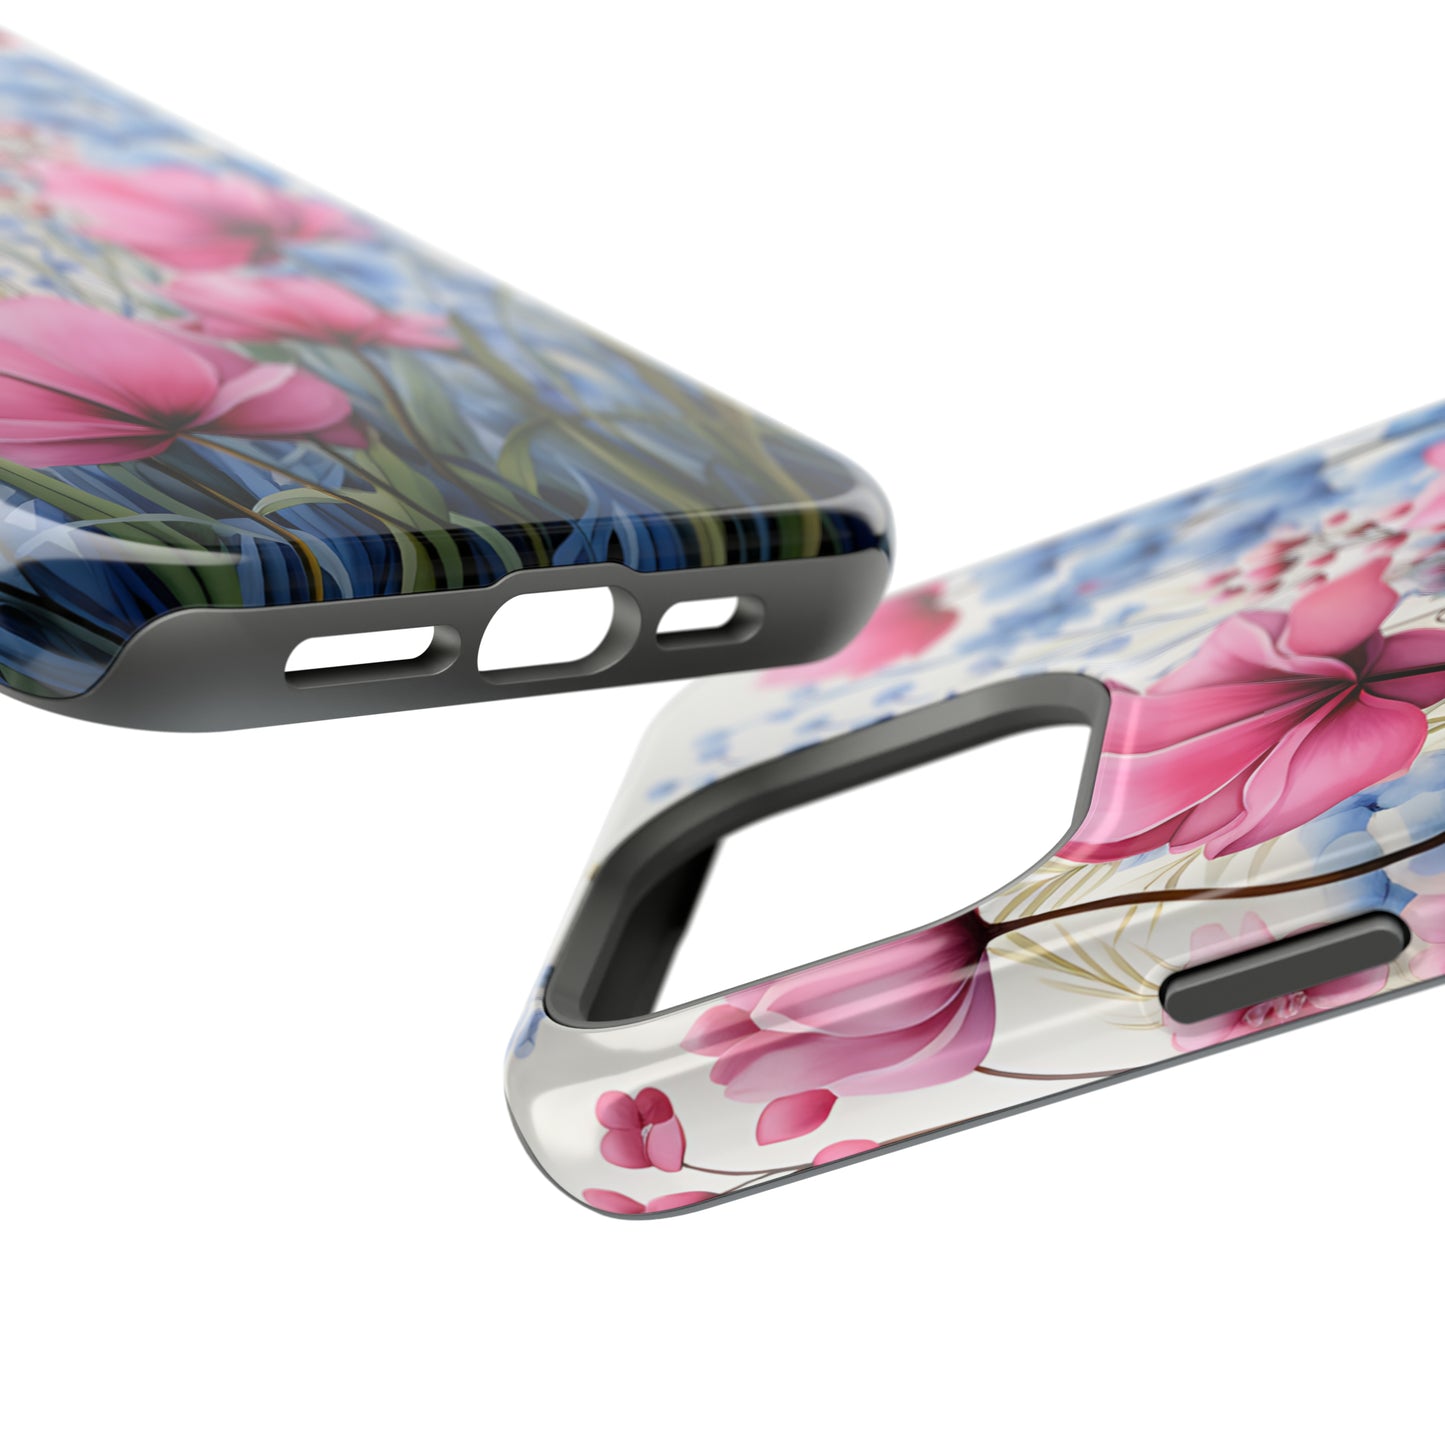 Pink and Blue Spring Flowers Case